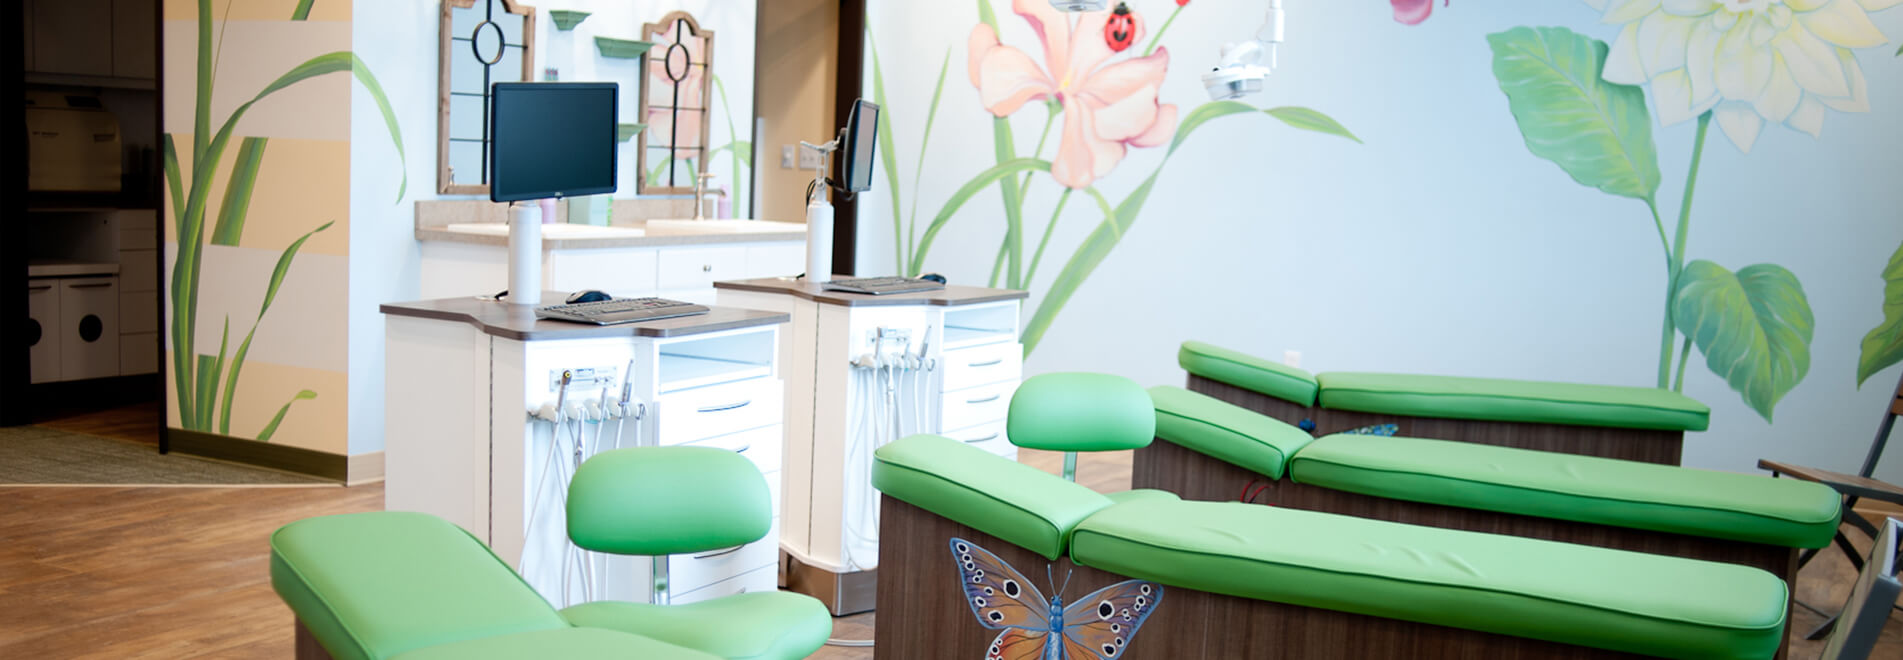 pediatric dentistry patient seating